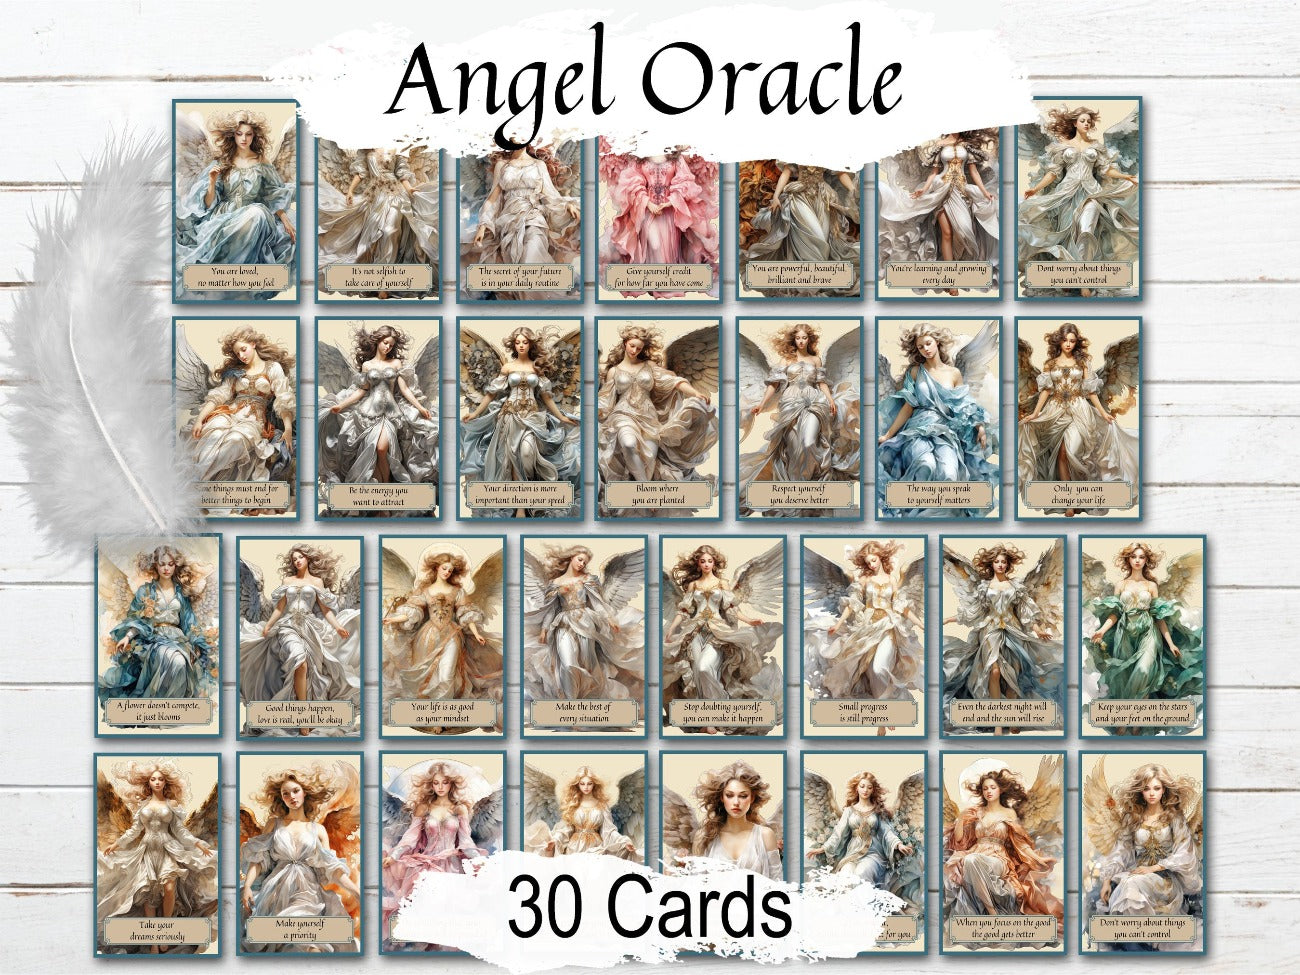 Angel Oracle Cards - A Divine Connection for Guidance, Recieve Angel Messages for Self-Discovery and Spiritual Growth, 30 Printable Cards- Morgana Magick Spell